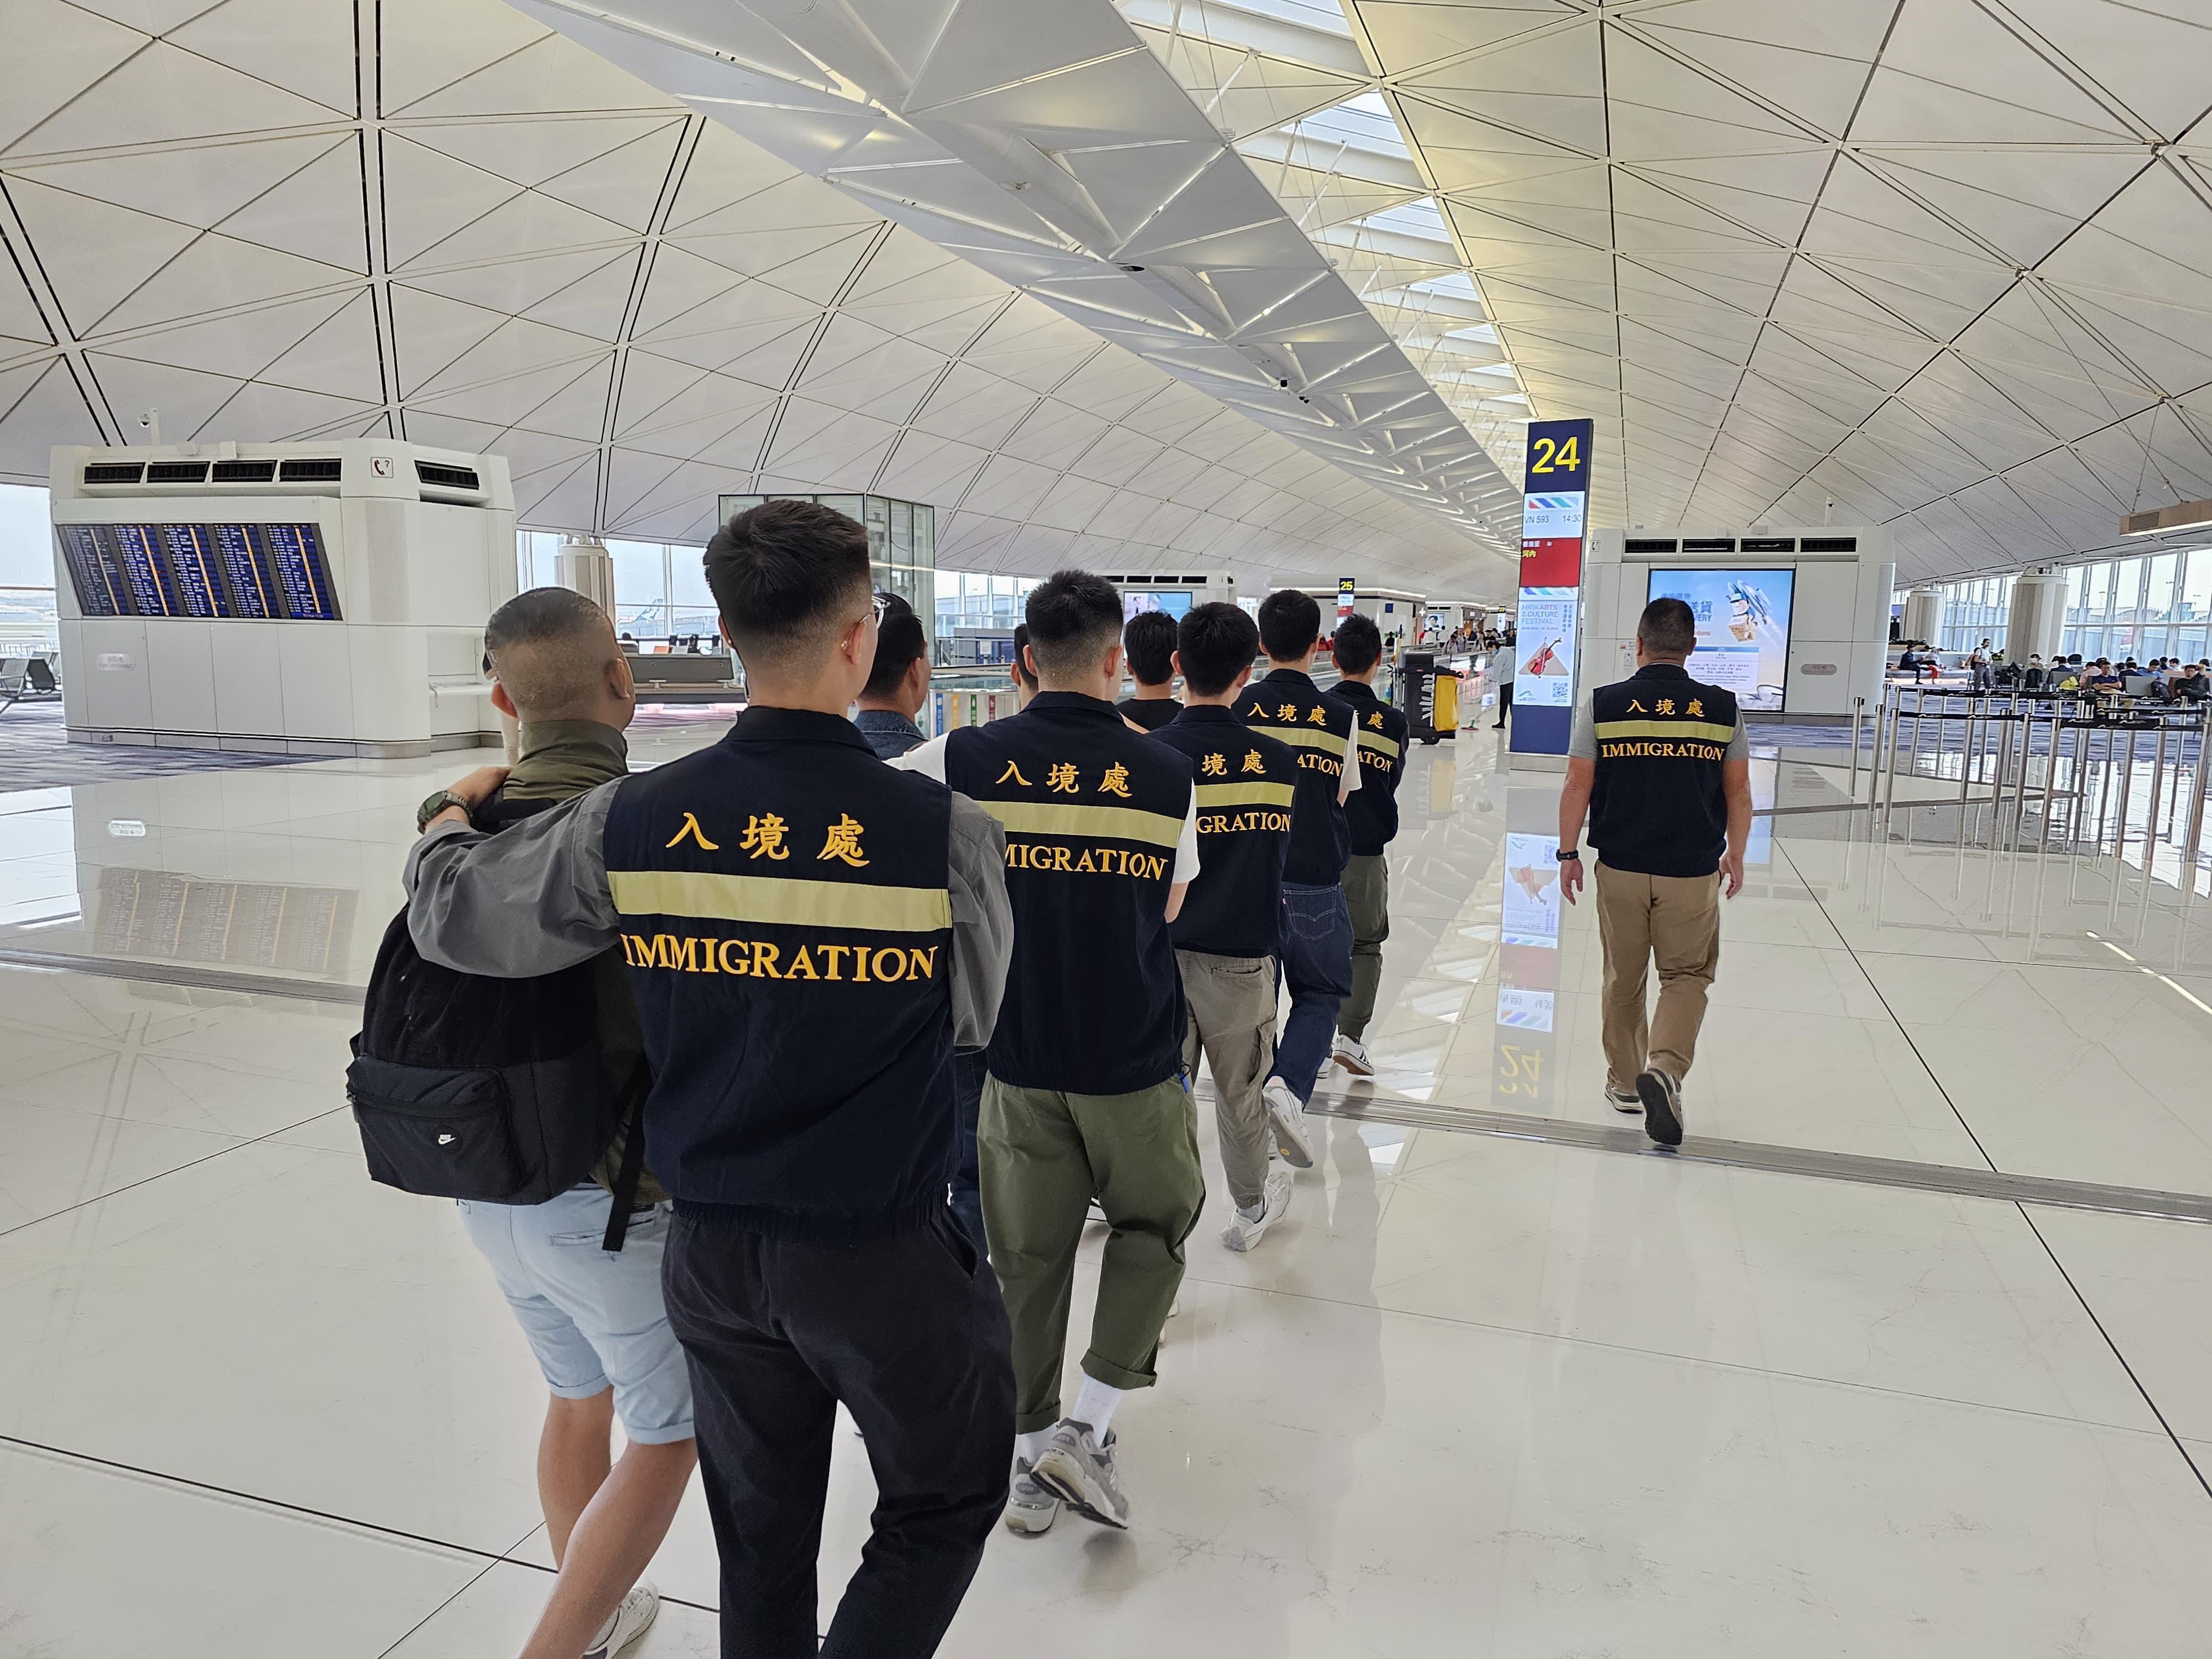 The Immigration Department (ImmD) carried out a repatriation operation today (October 31). A total of 21 Vietnamese illegal immigrants were repatriated to Vietnam. Photo shows removees being escorted by ImmD officers to depart from Hong Kong.